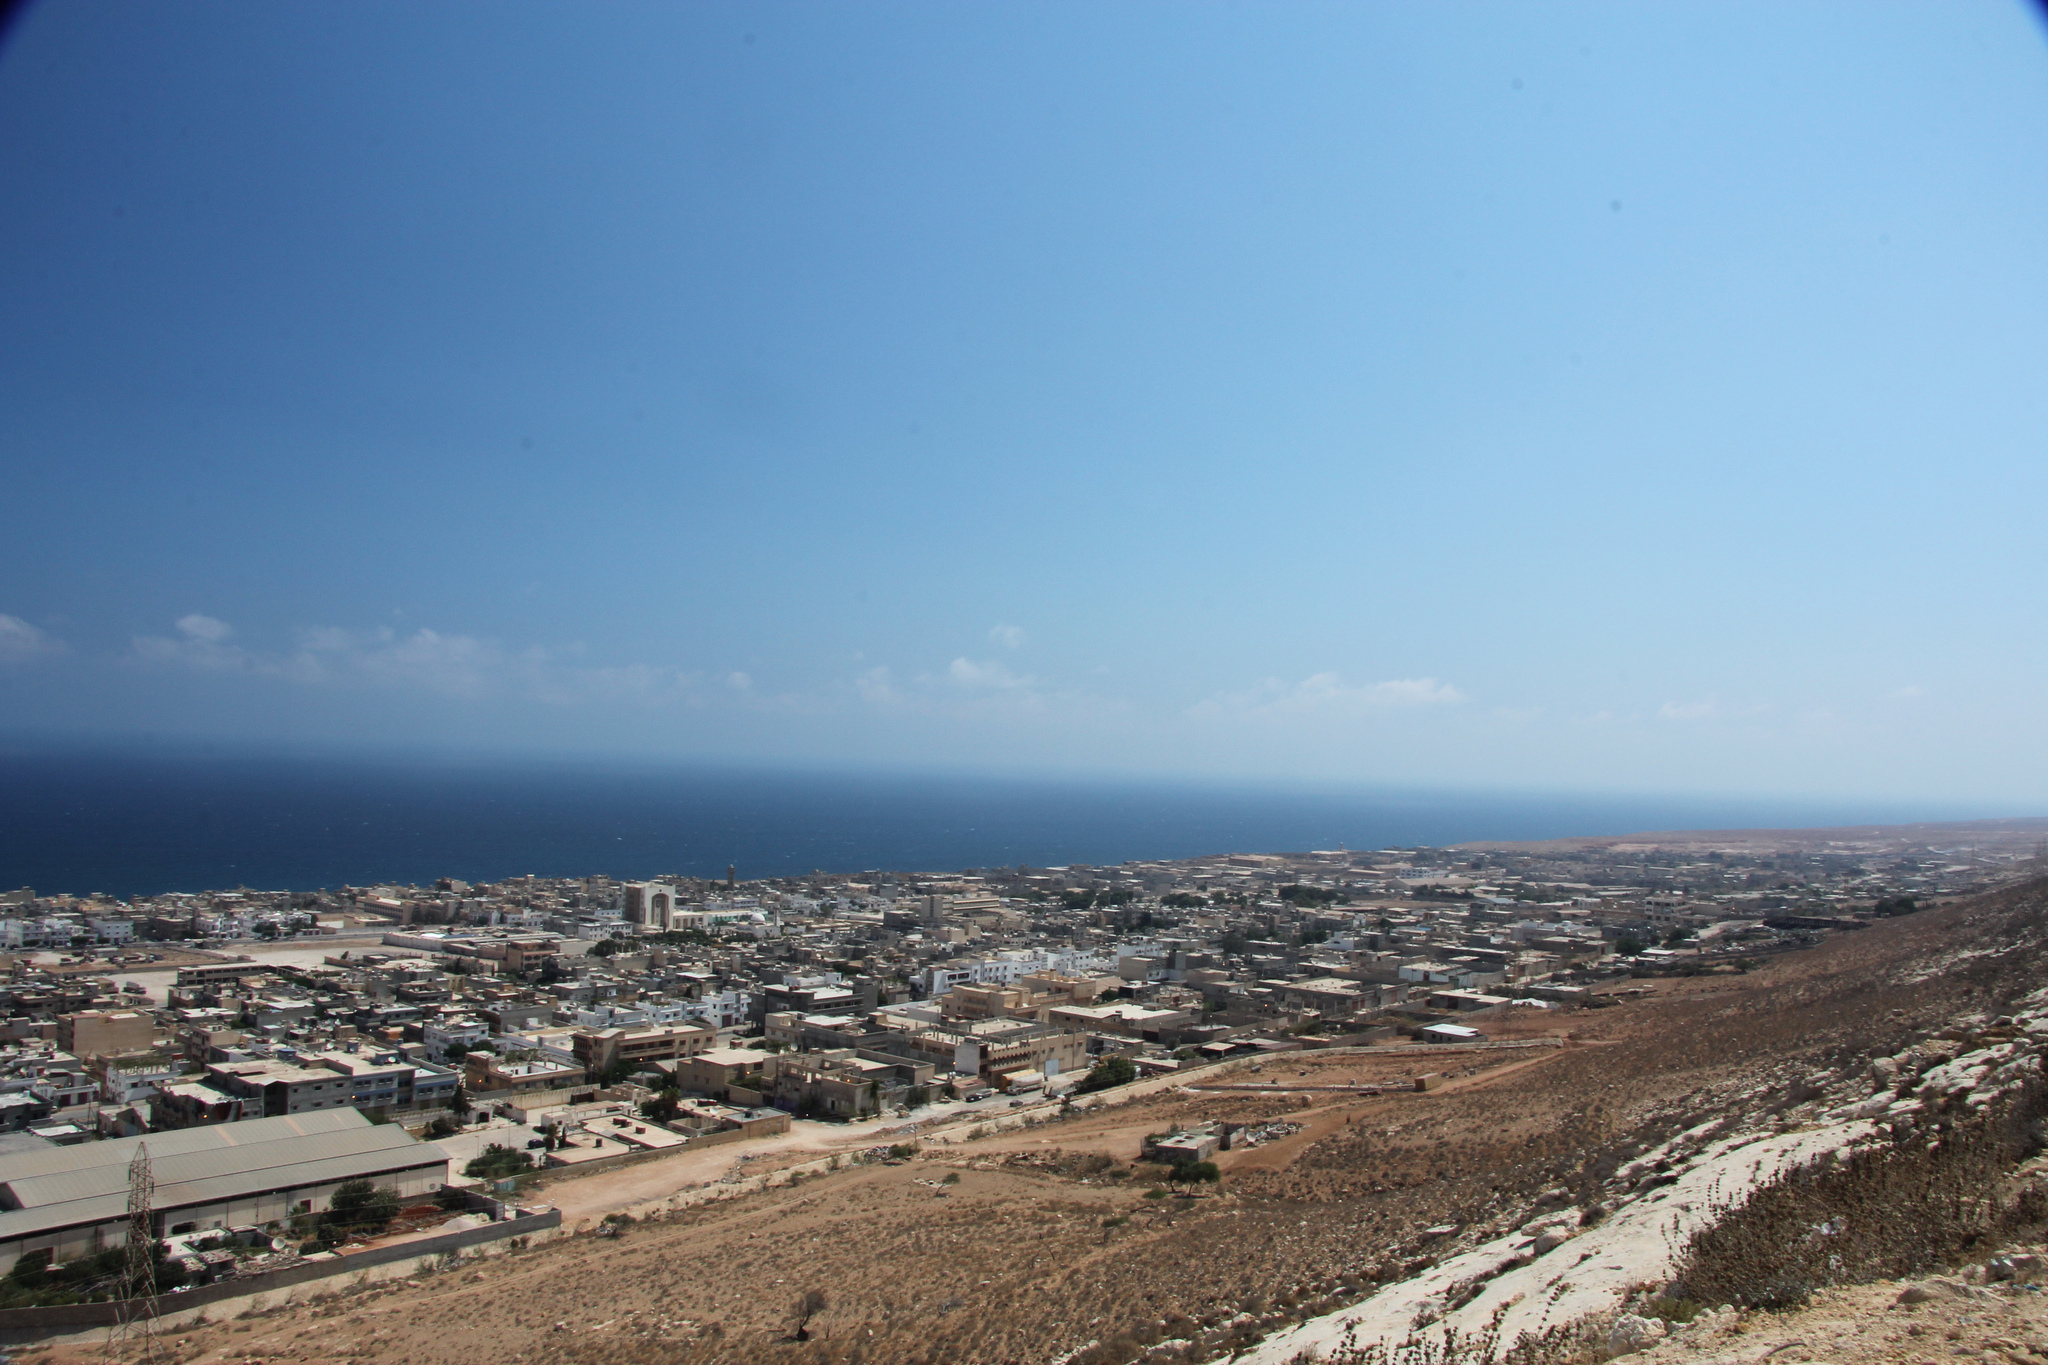 The Libyan costal city of Derna has been under militarily encirclement since July 2017. (Picture: Creative Commons)